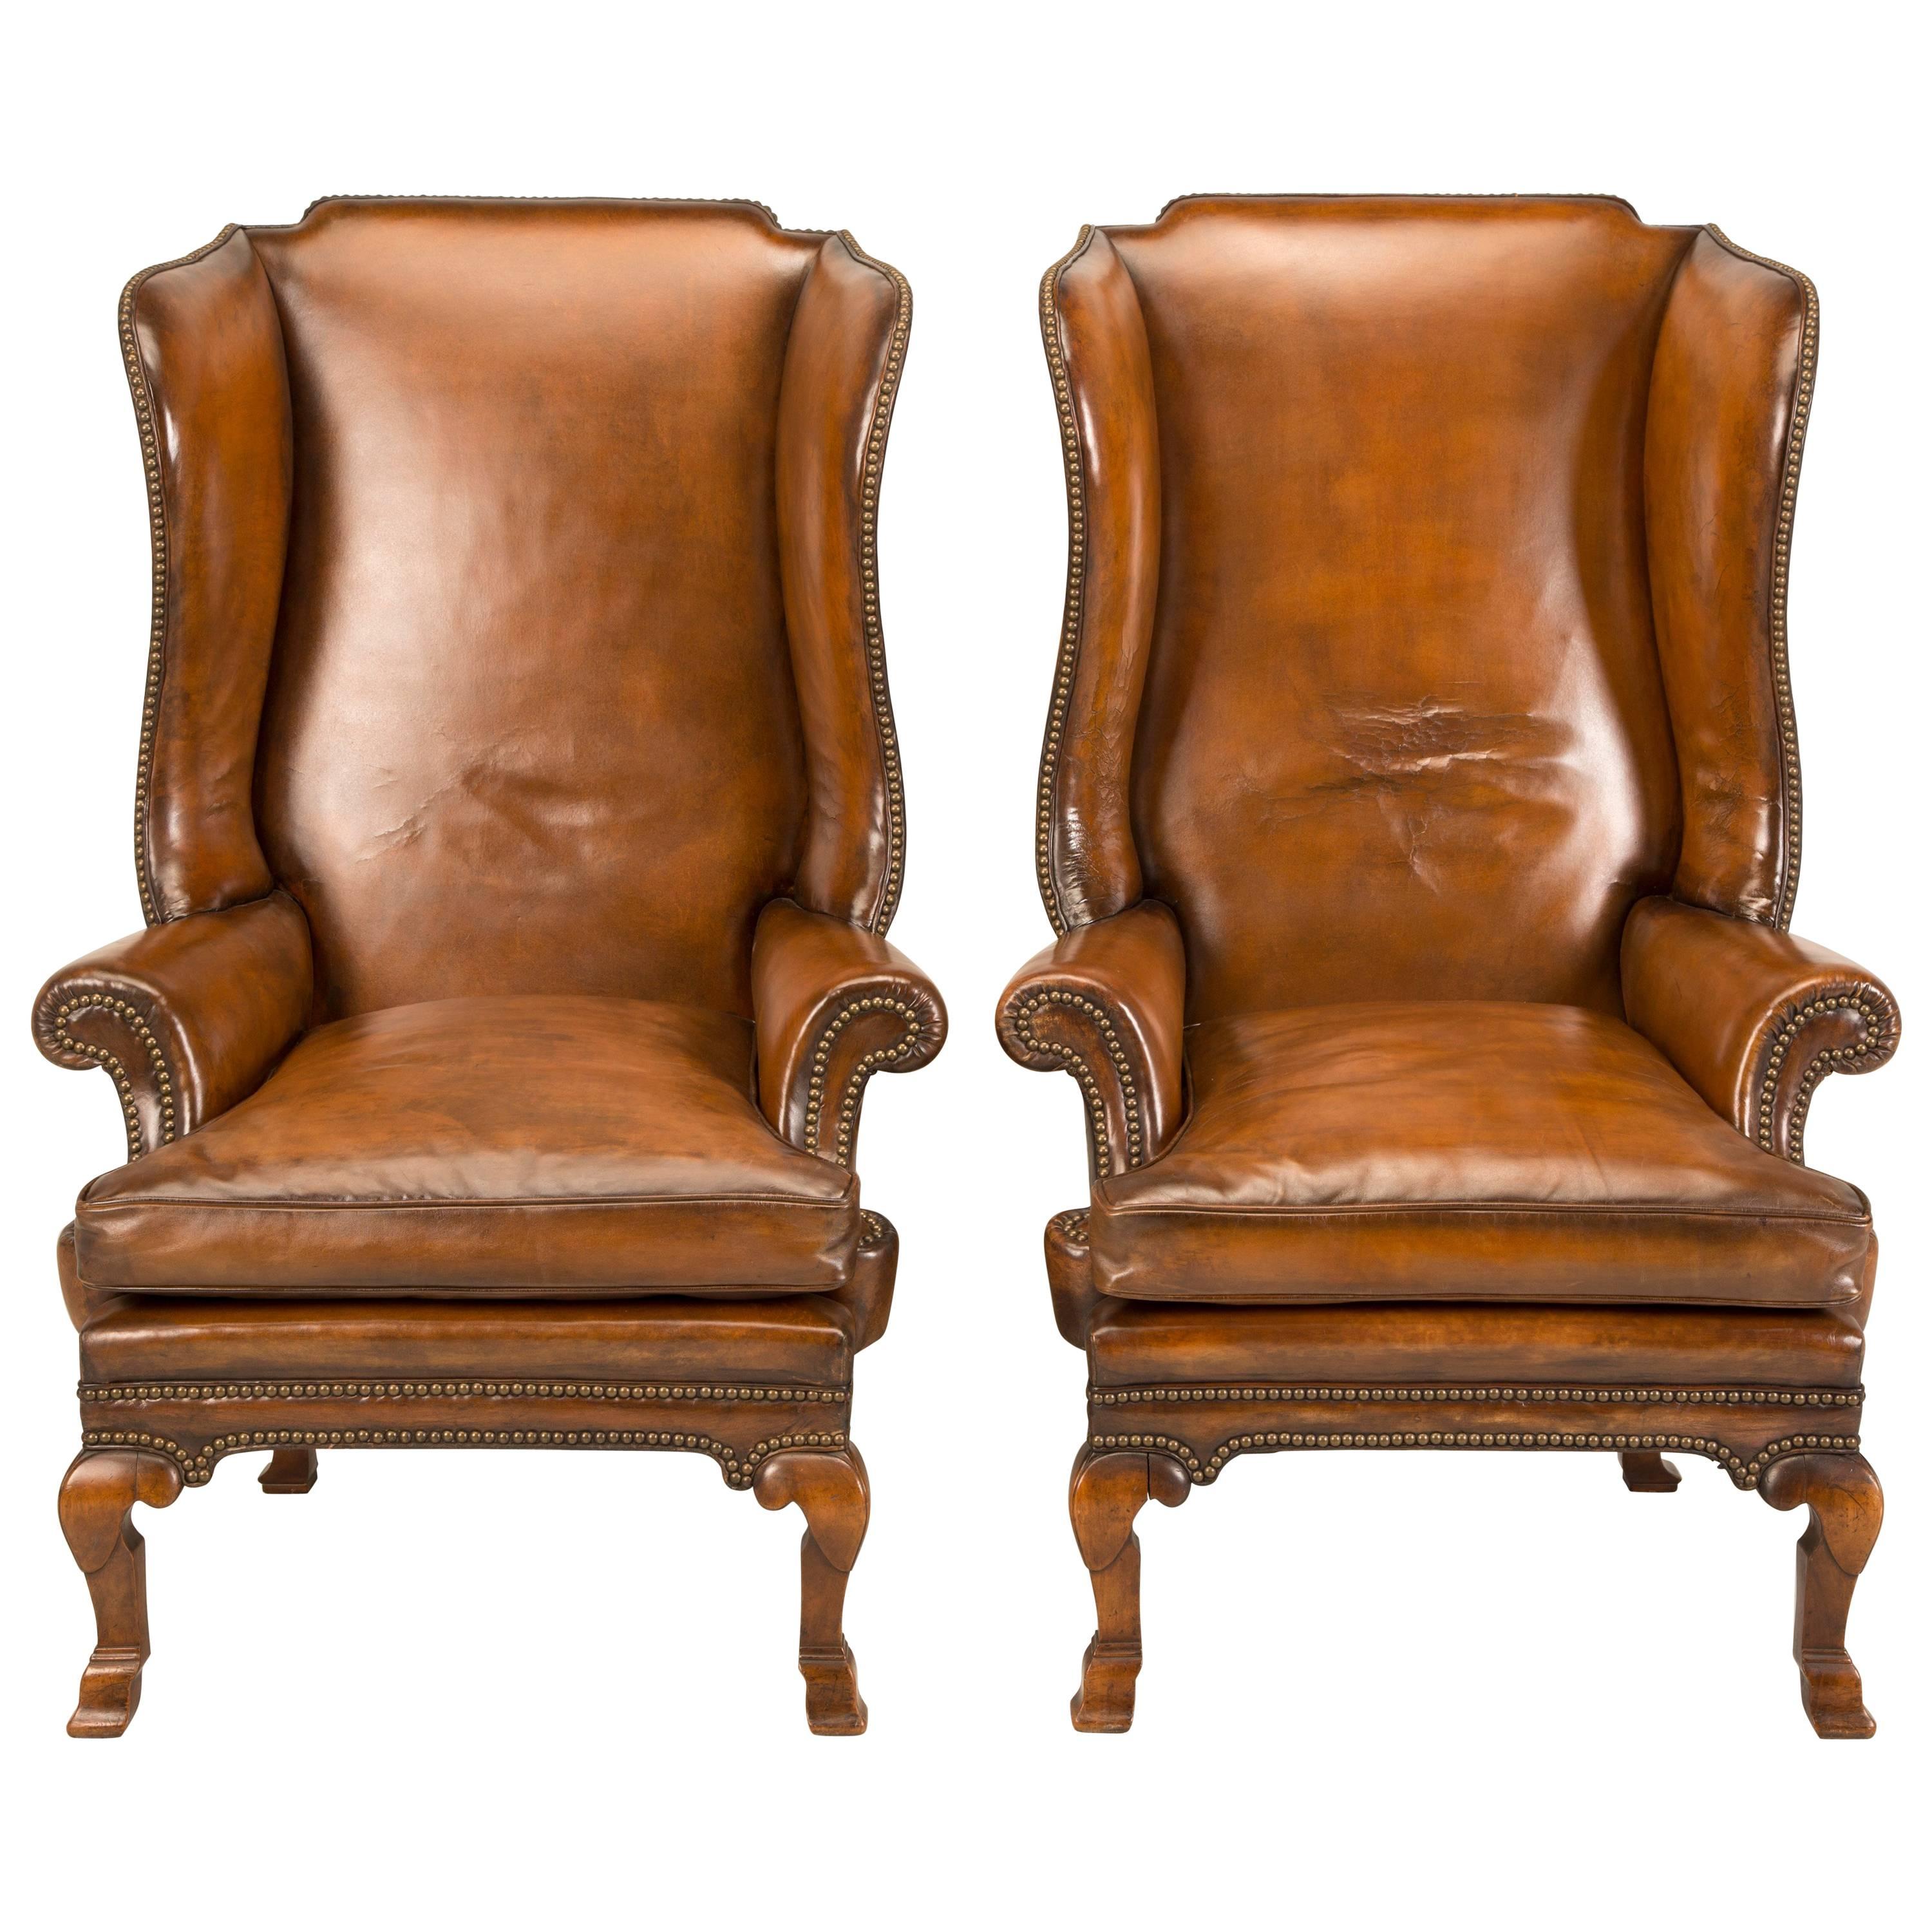 Pair of Antique English Wingback Leather Chairs, circa 1890